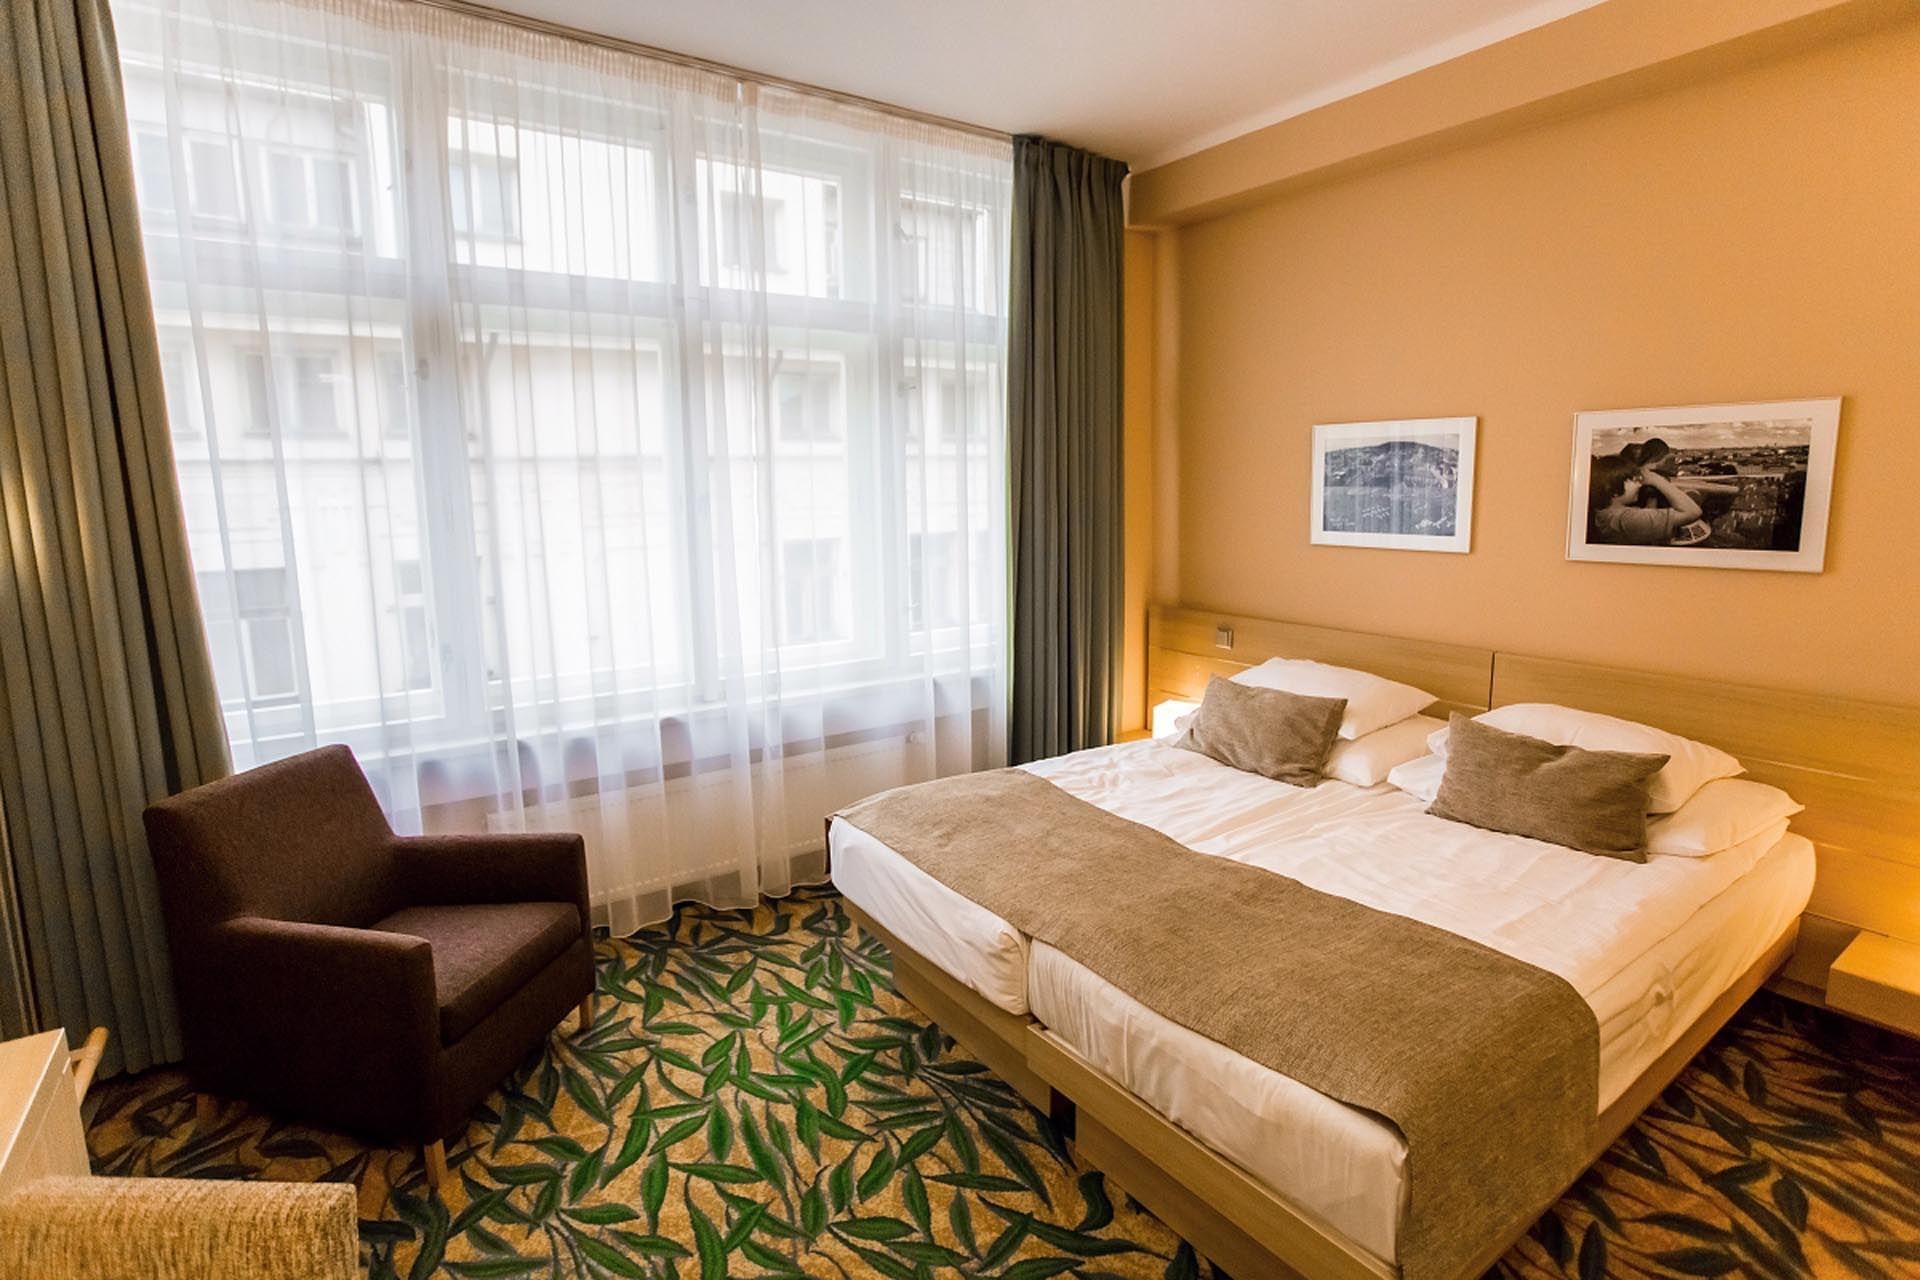 Deluxe Room with two beds at Hotel Amarilis